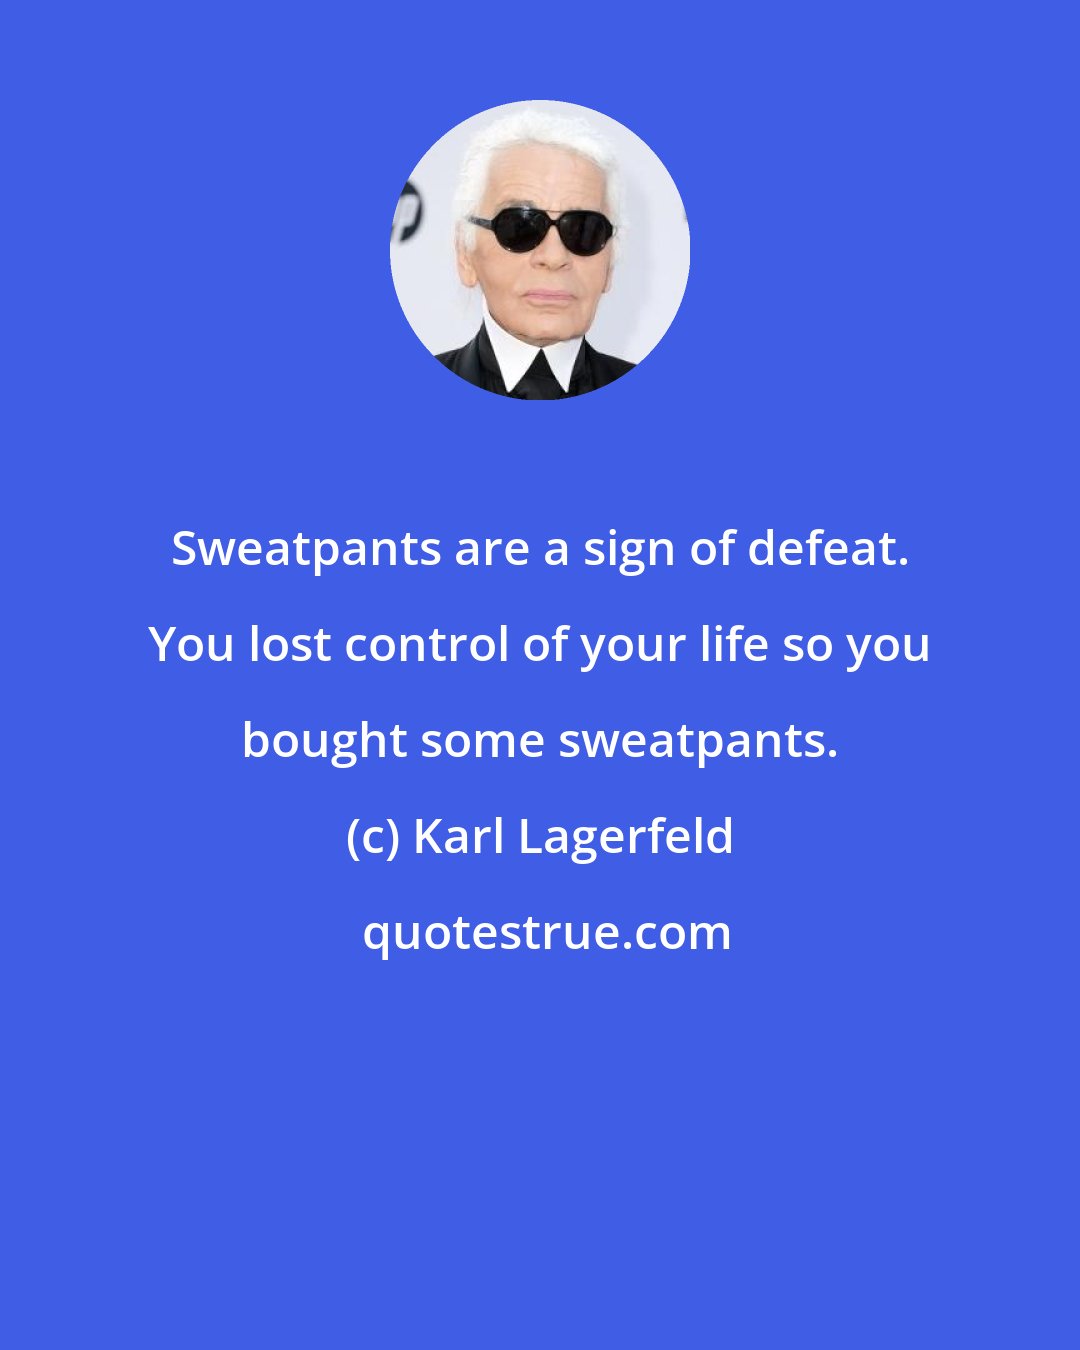 Karl Lagerfeld: Sweatpants are a sign of defeat. You lost control of your life so you bought some sweatpants.